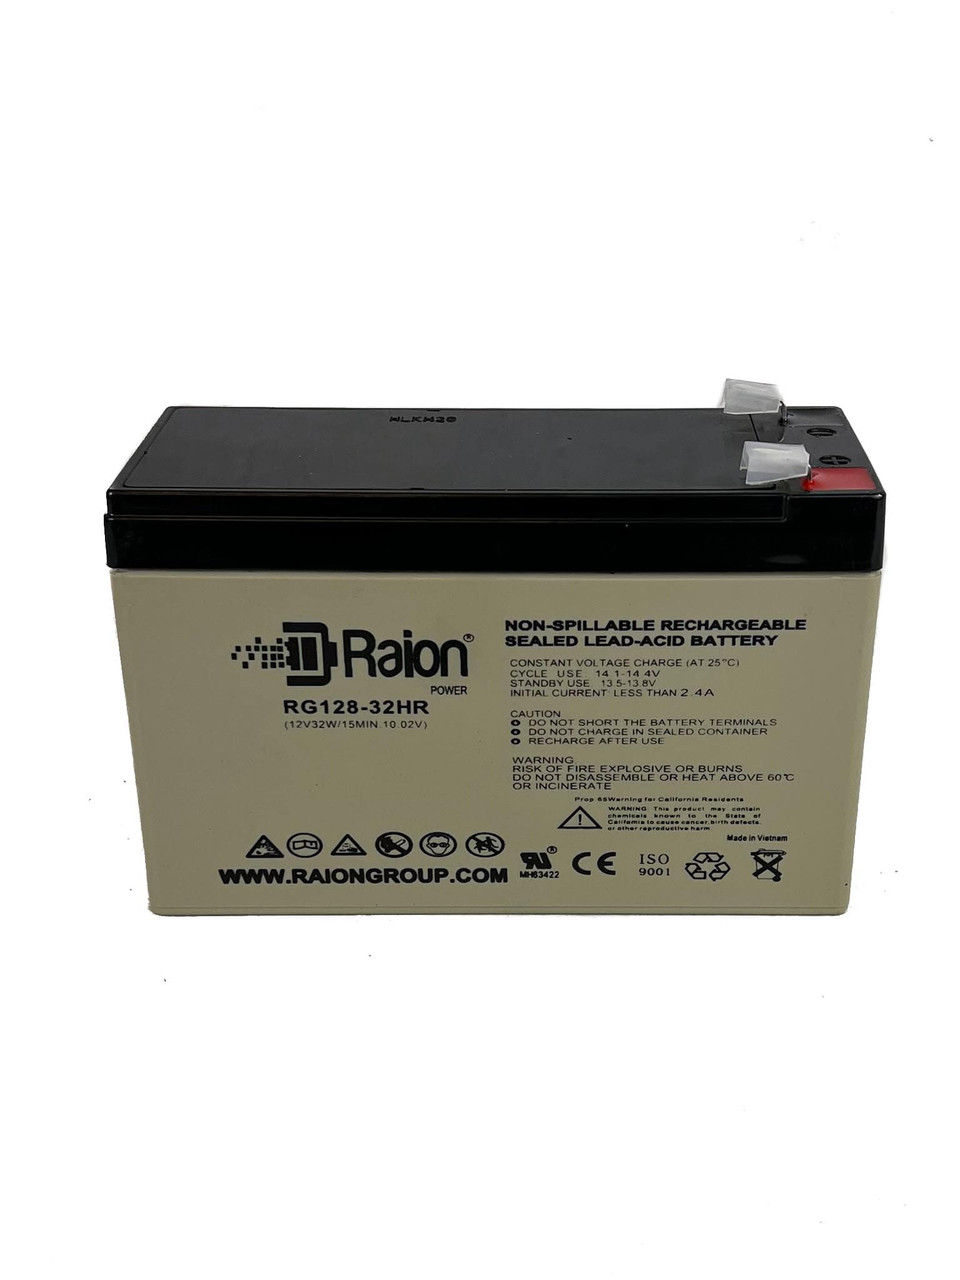 Raion Power RG128-32HR Replacement High Rate Battery Cartridge for APC BACK-UPS ES BE550R